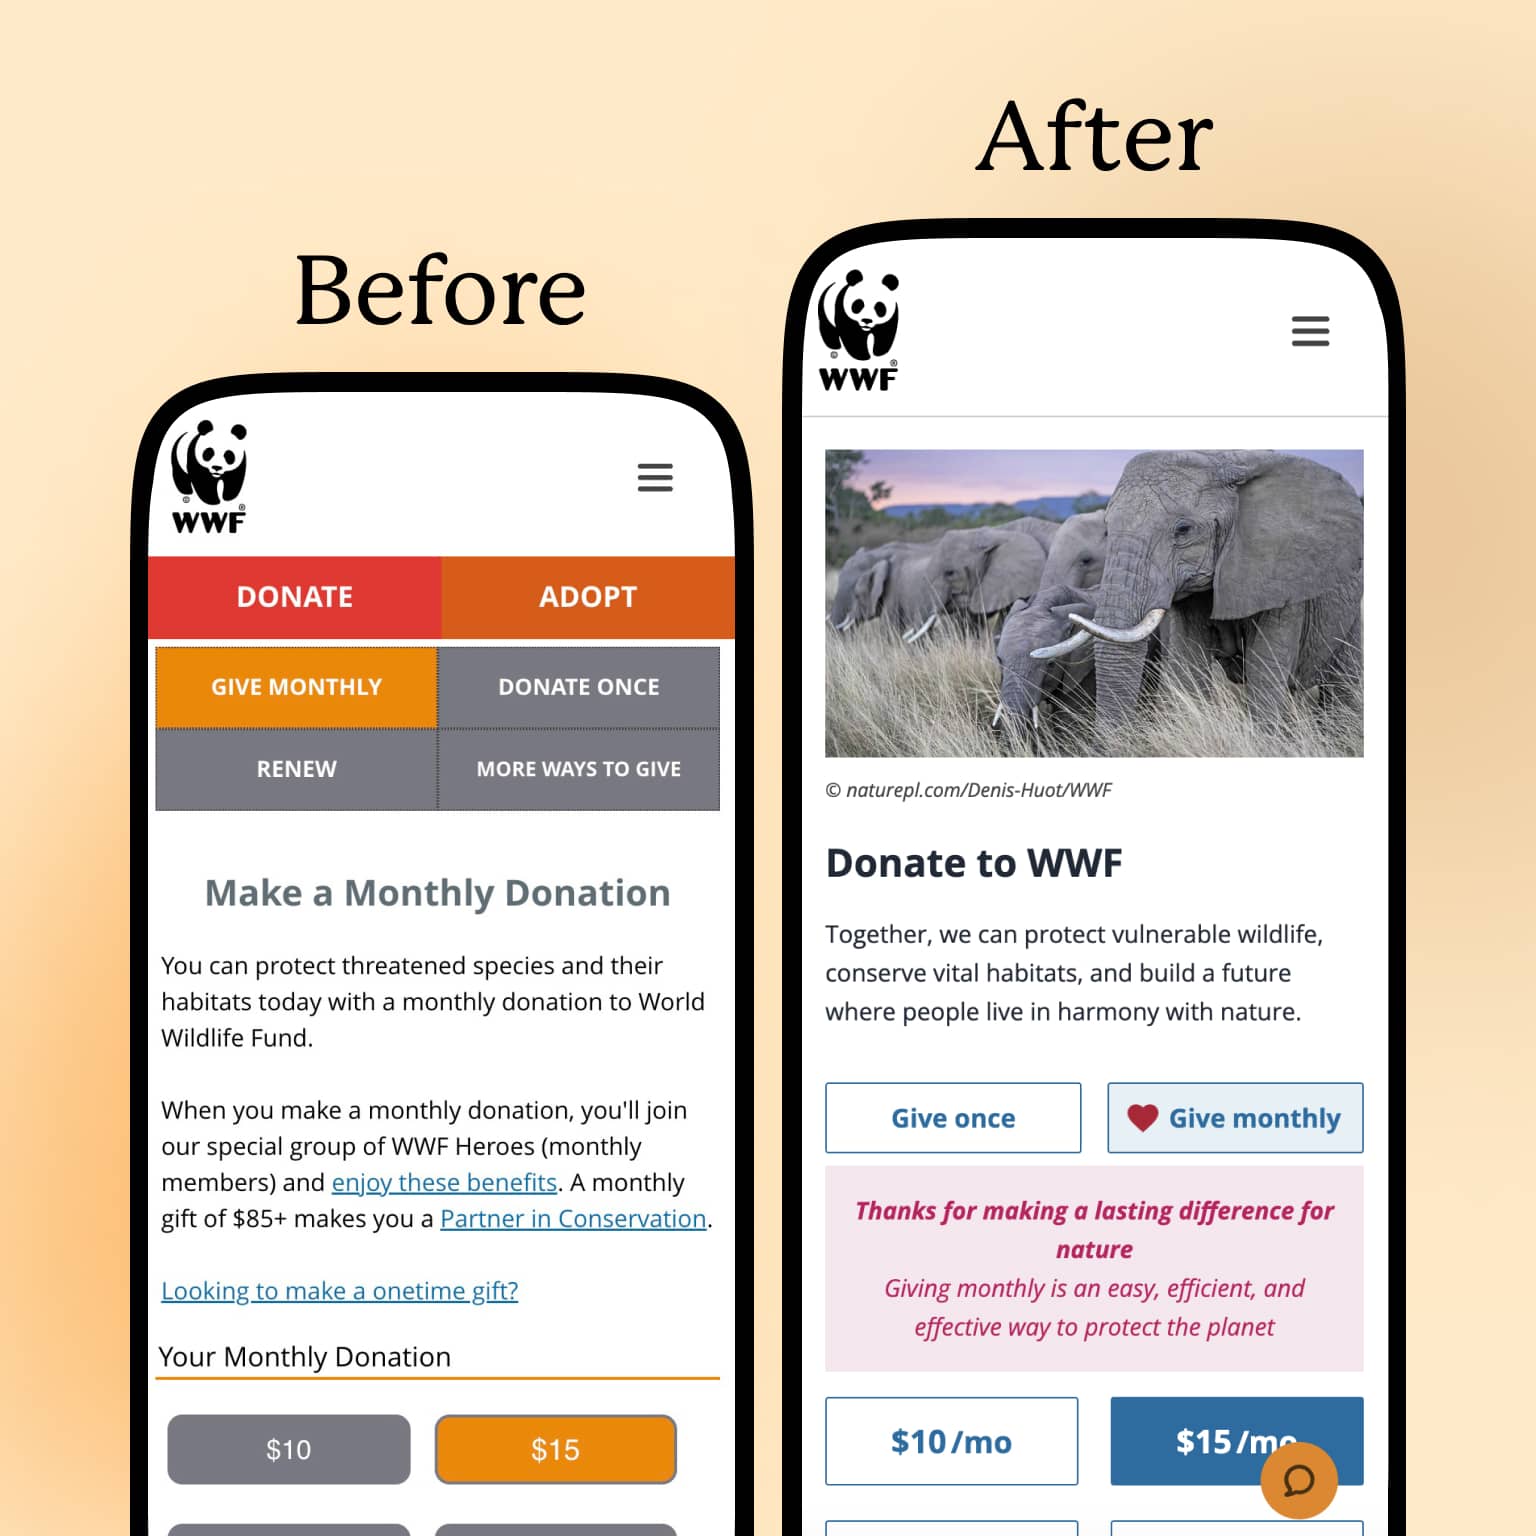 Check out this before and after comparison of WWF's mobile donation page design